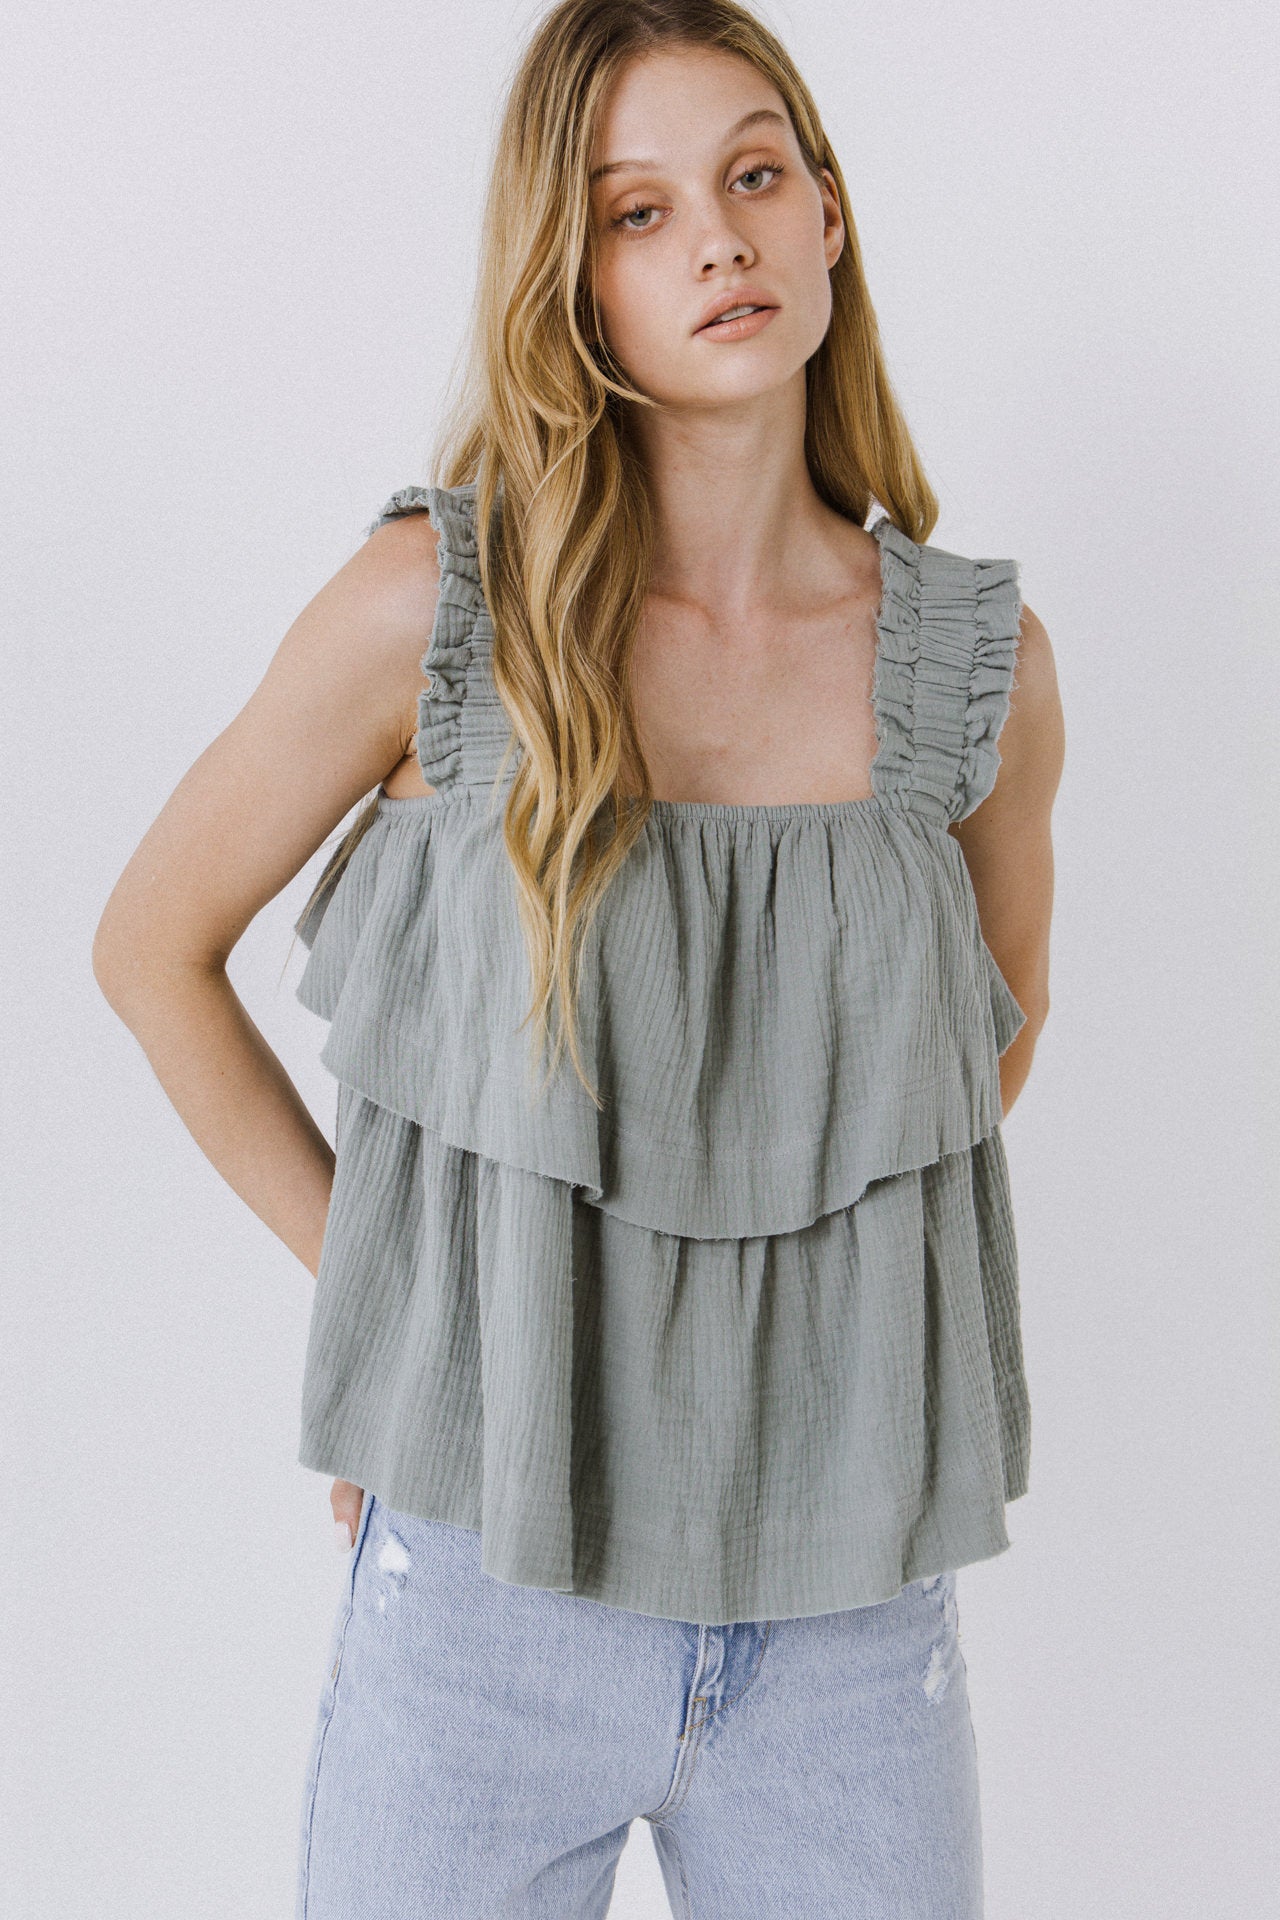 FREE THE ROSES - Ruffled Straps with Tiered Top - TOPS available at Objectrare